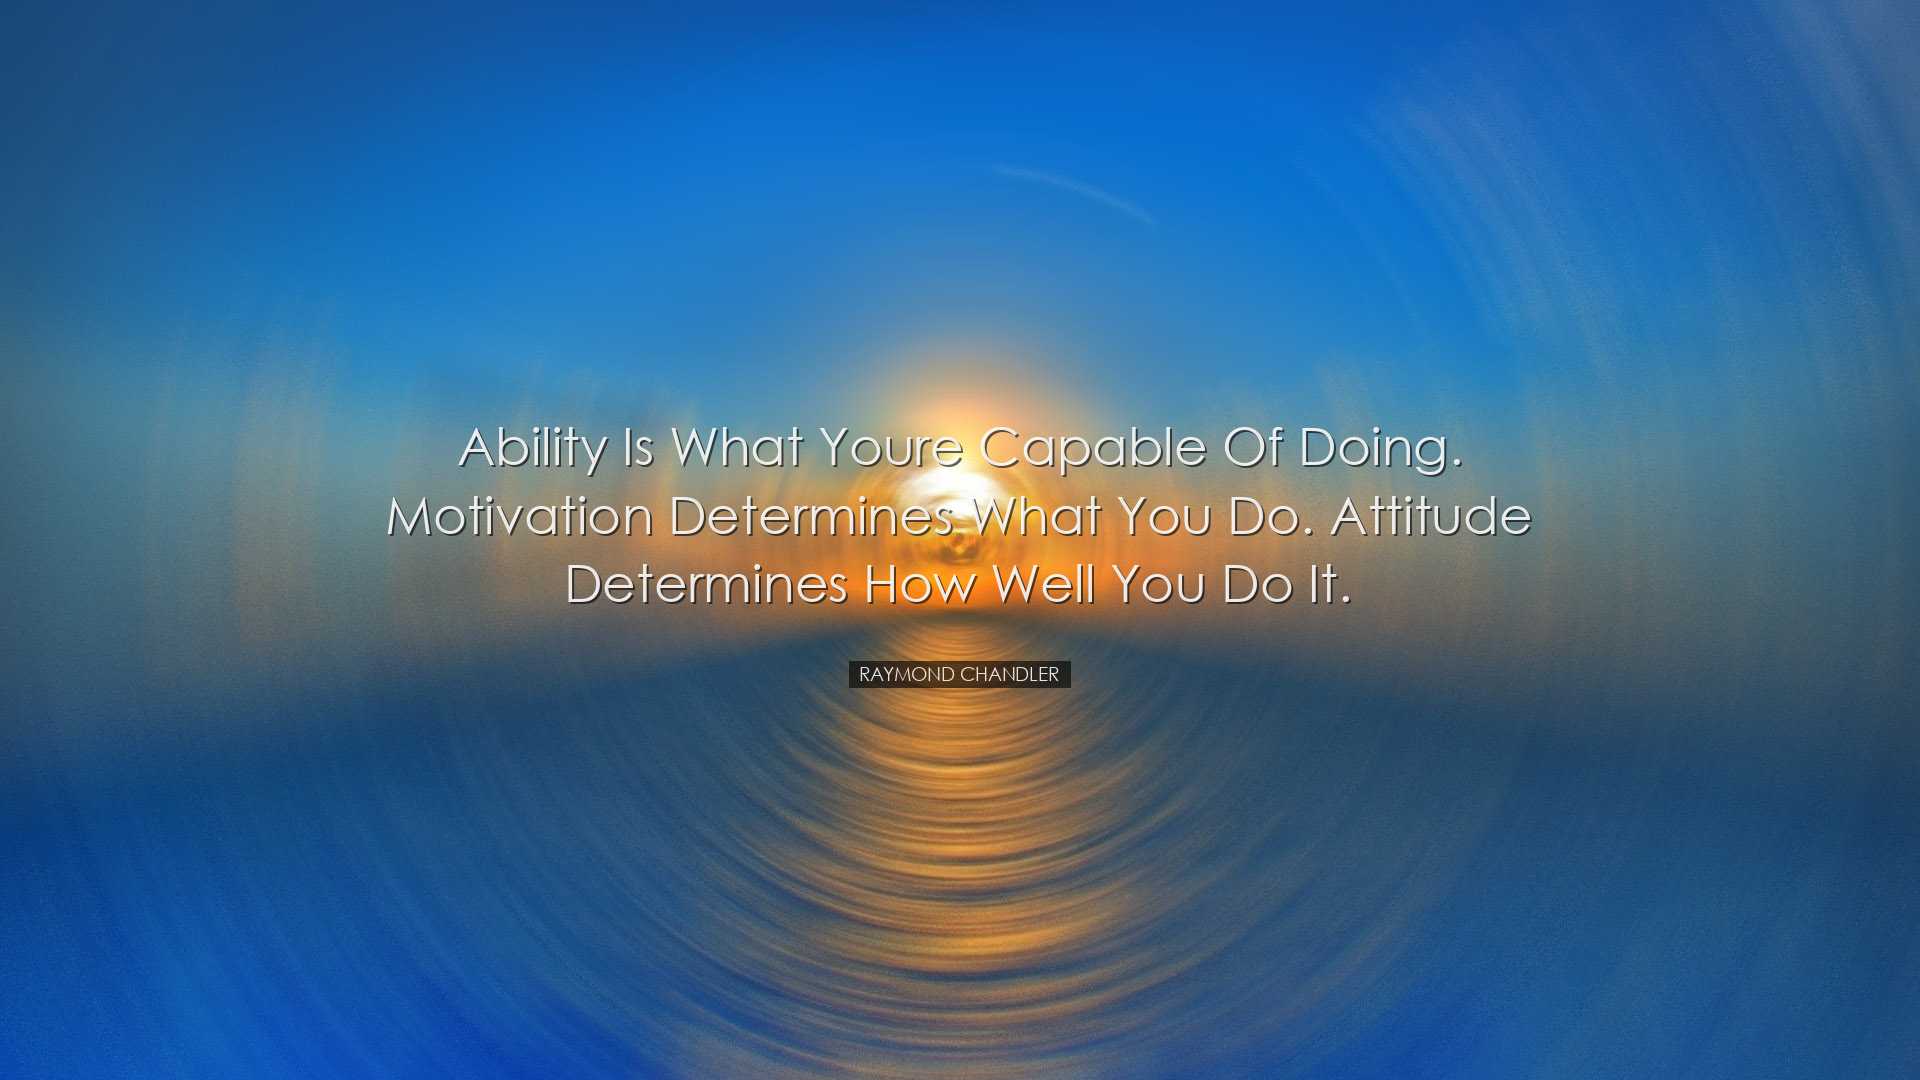 Ability is what youre capable of doing. Motivation determines what